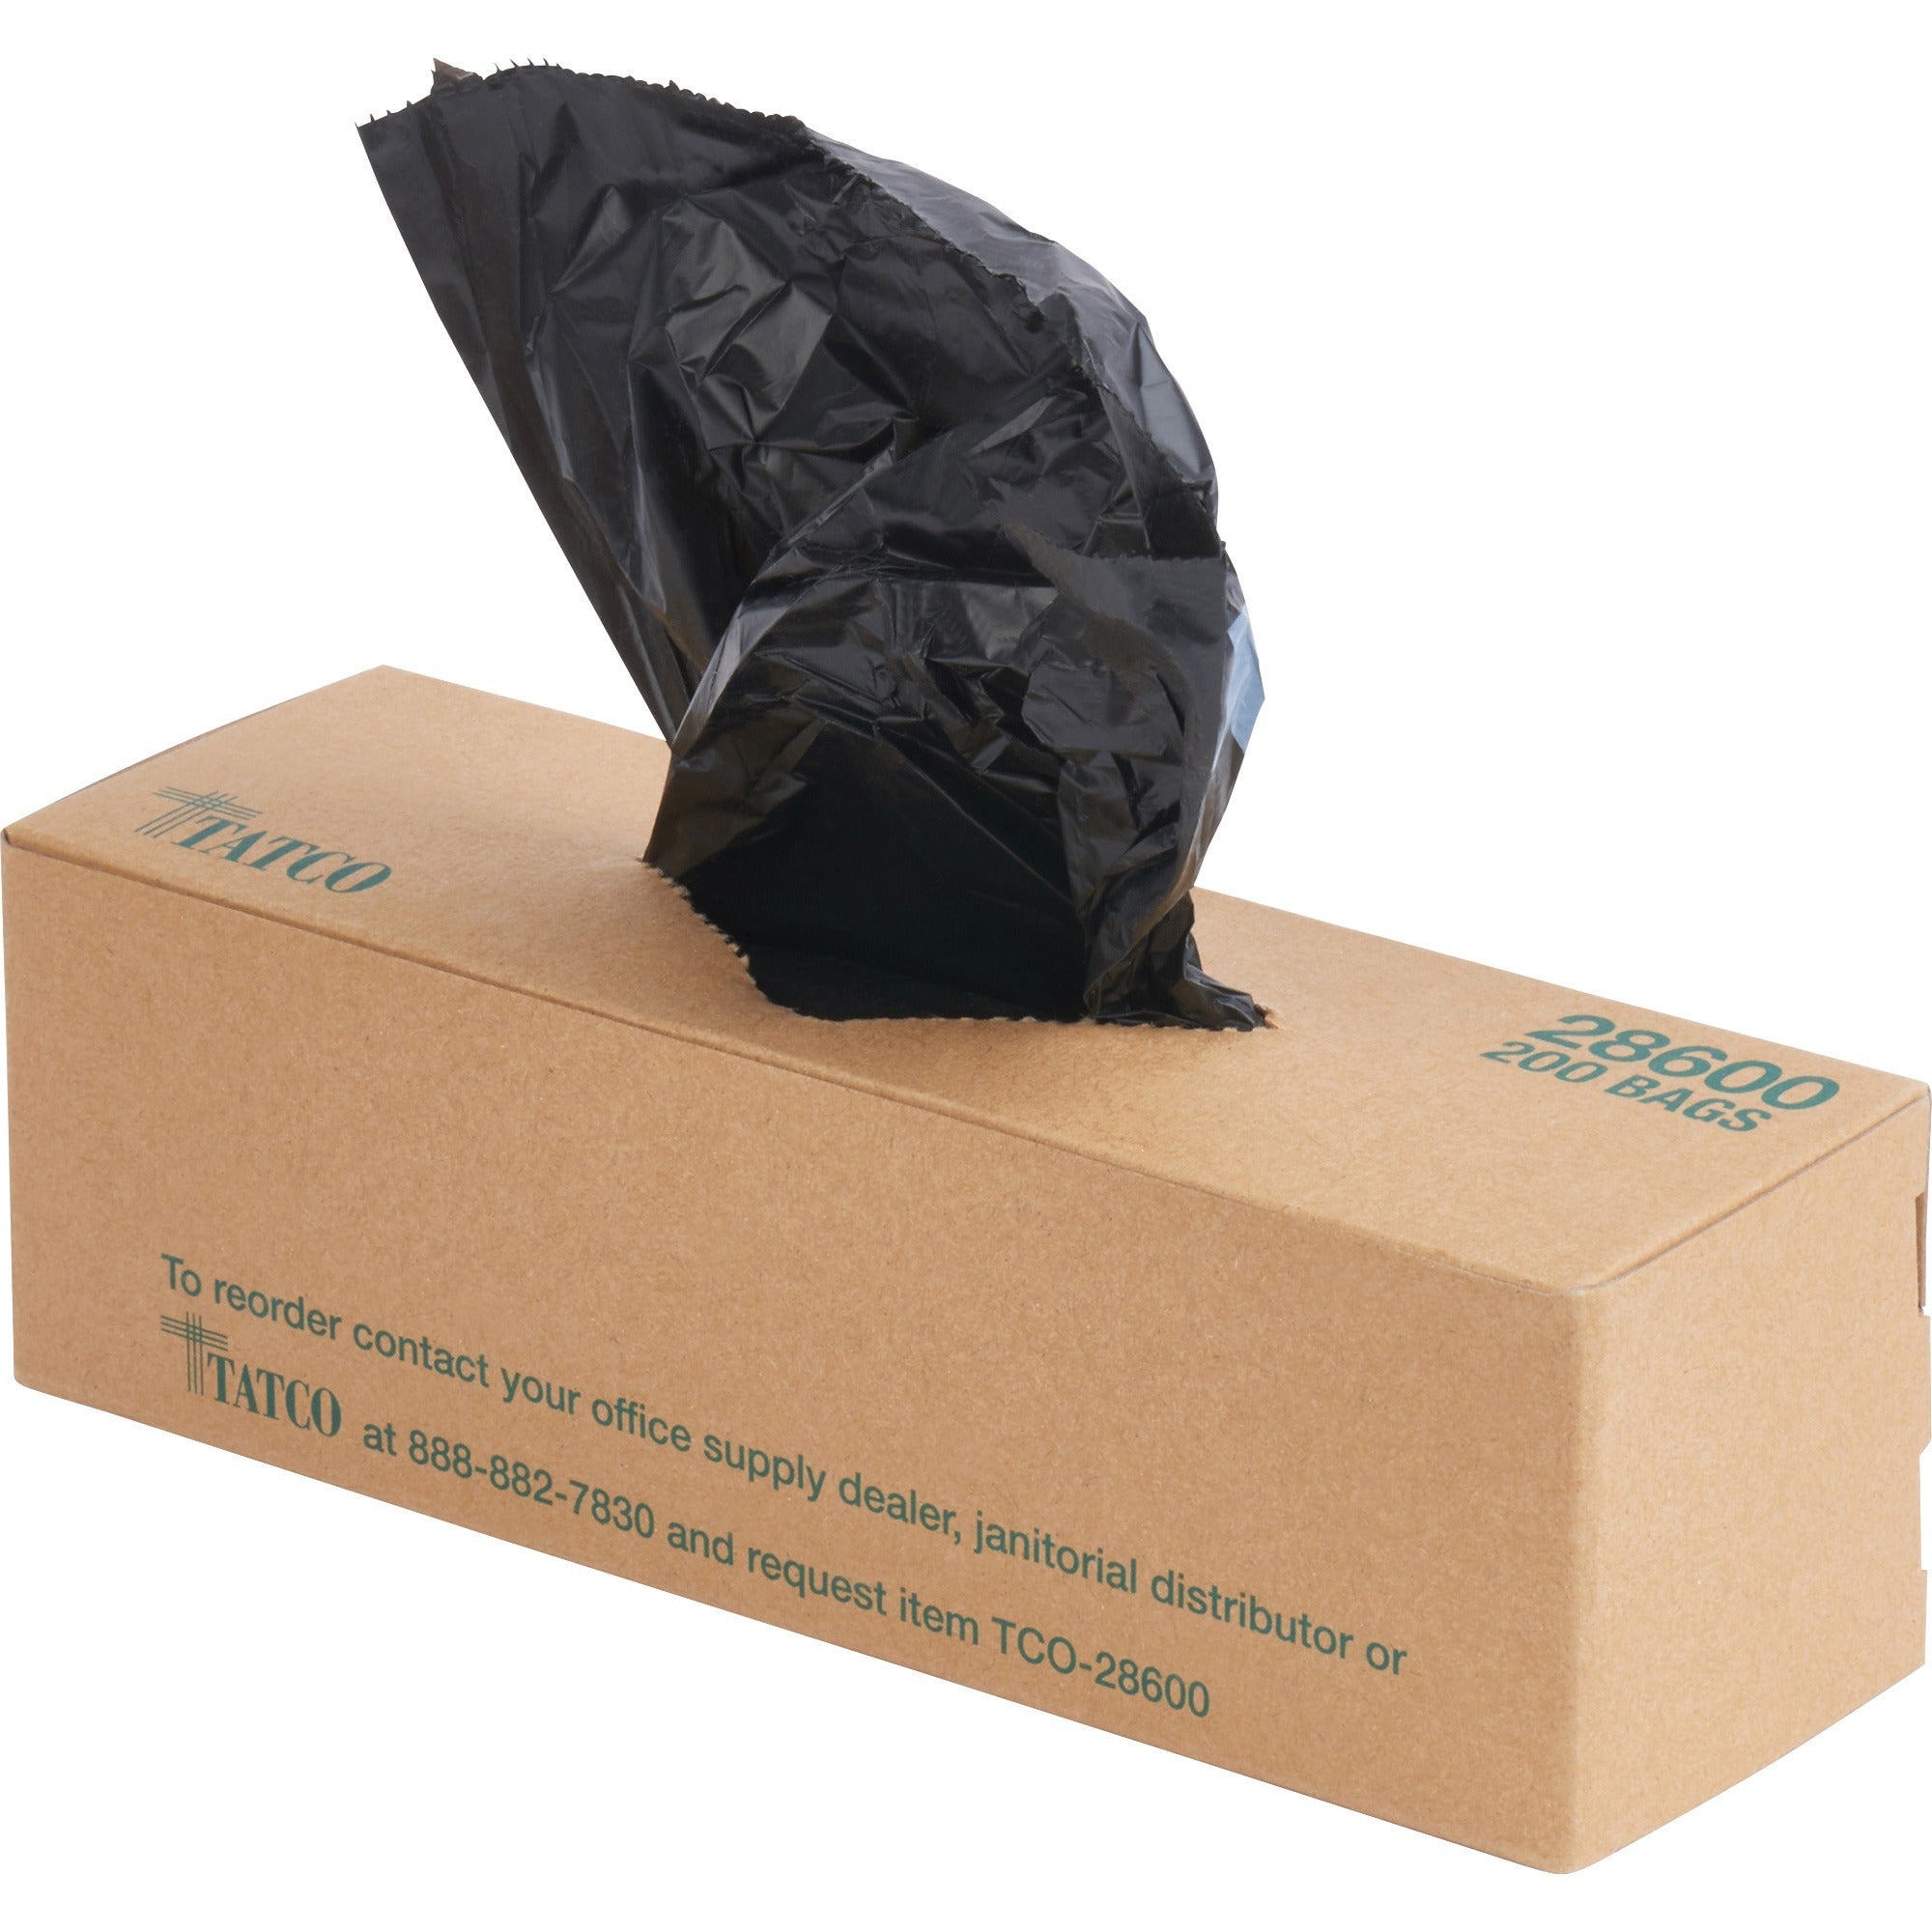 tatco-dog-waste-station-refill-bags-black-10-carton-200-per-box-waste-disposal-office-park-home_tco28600 - 1